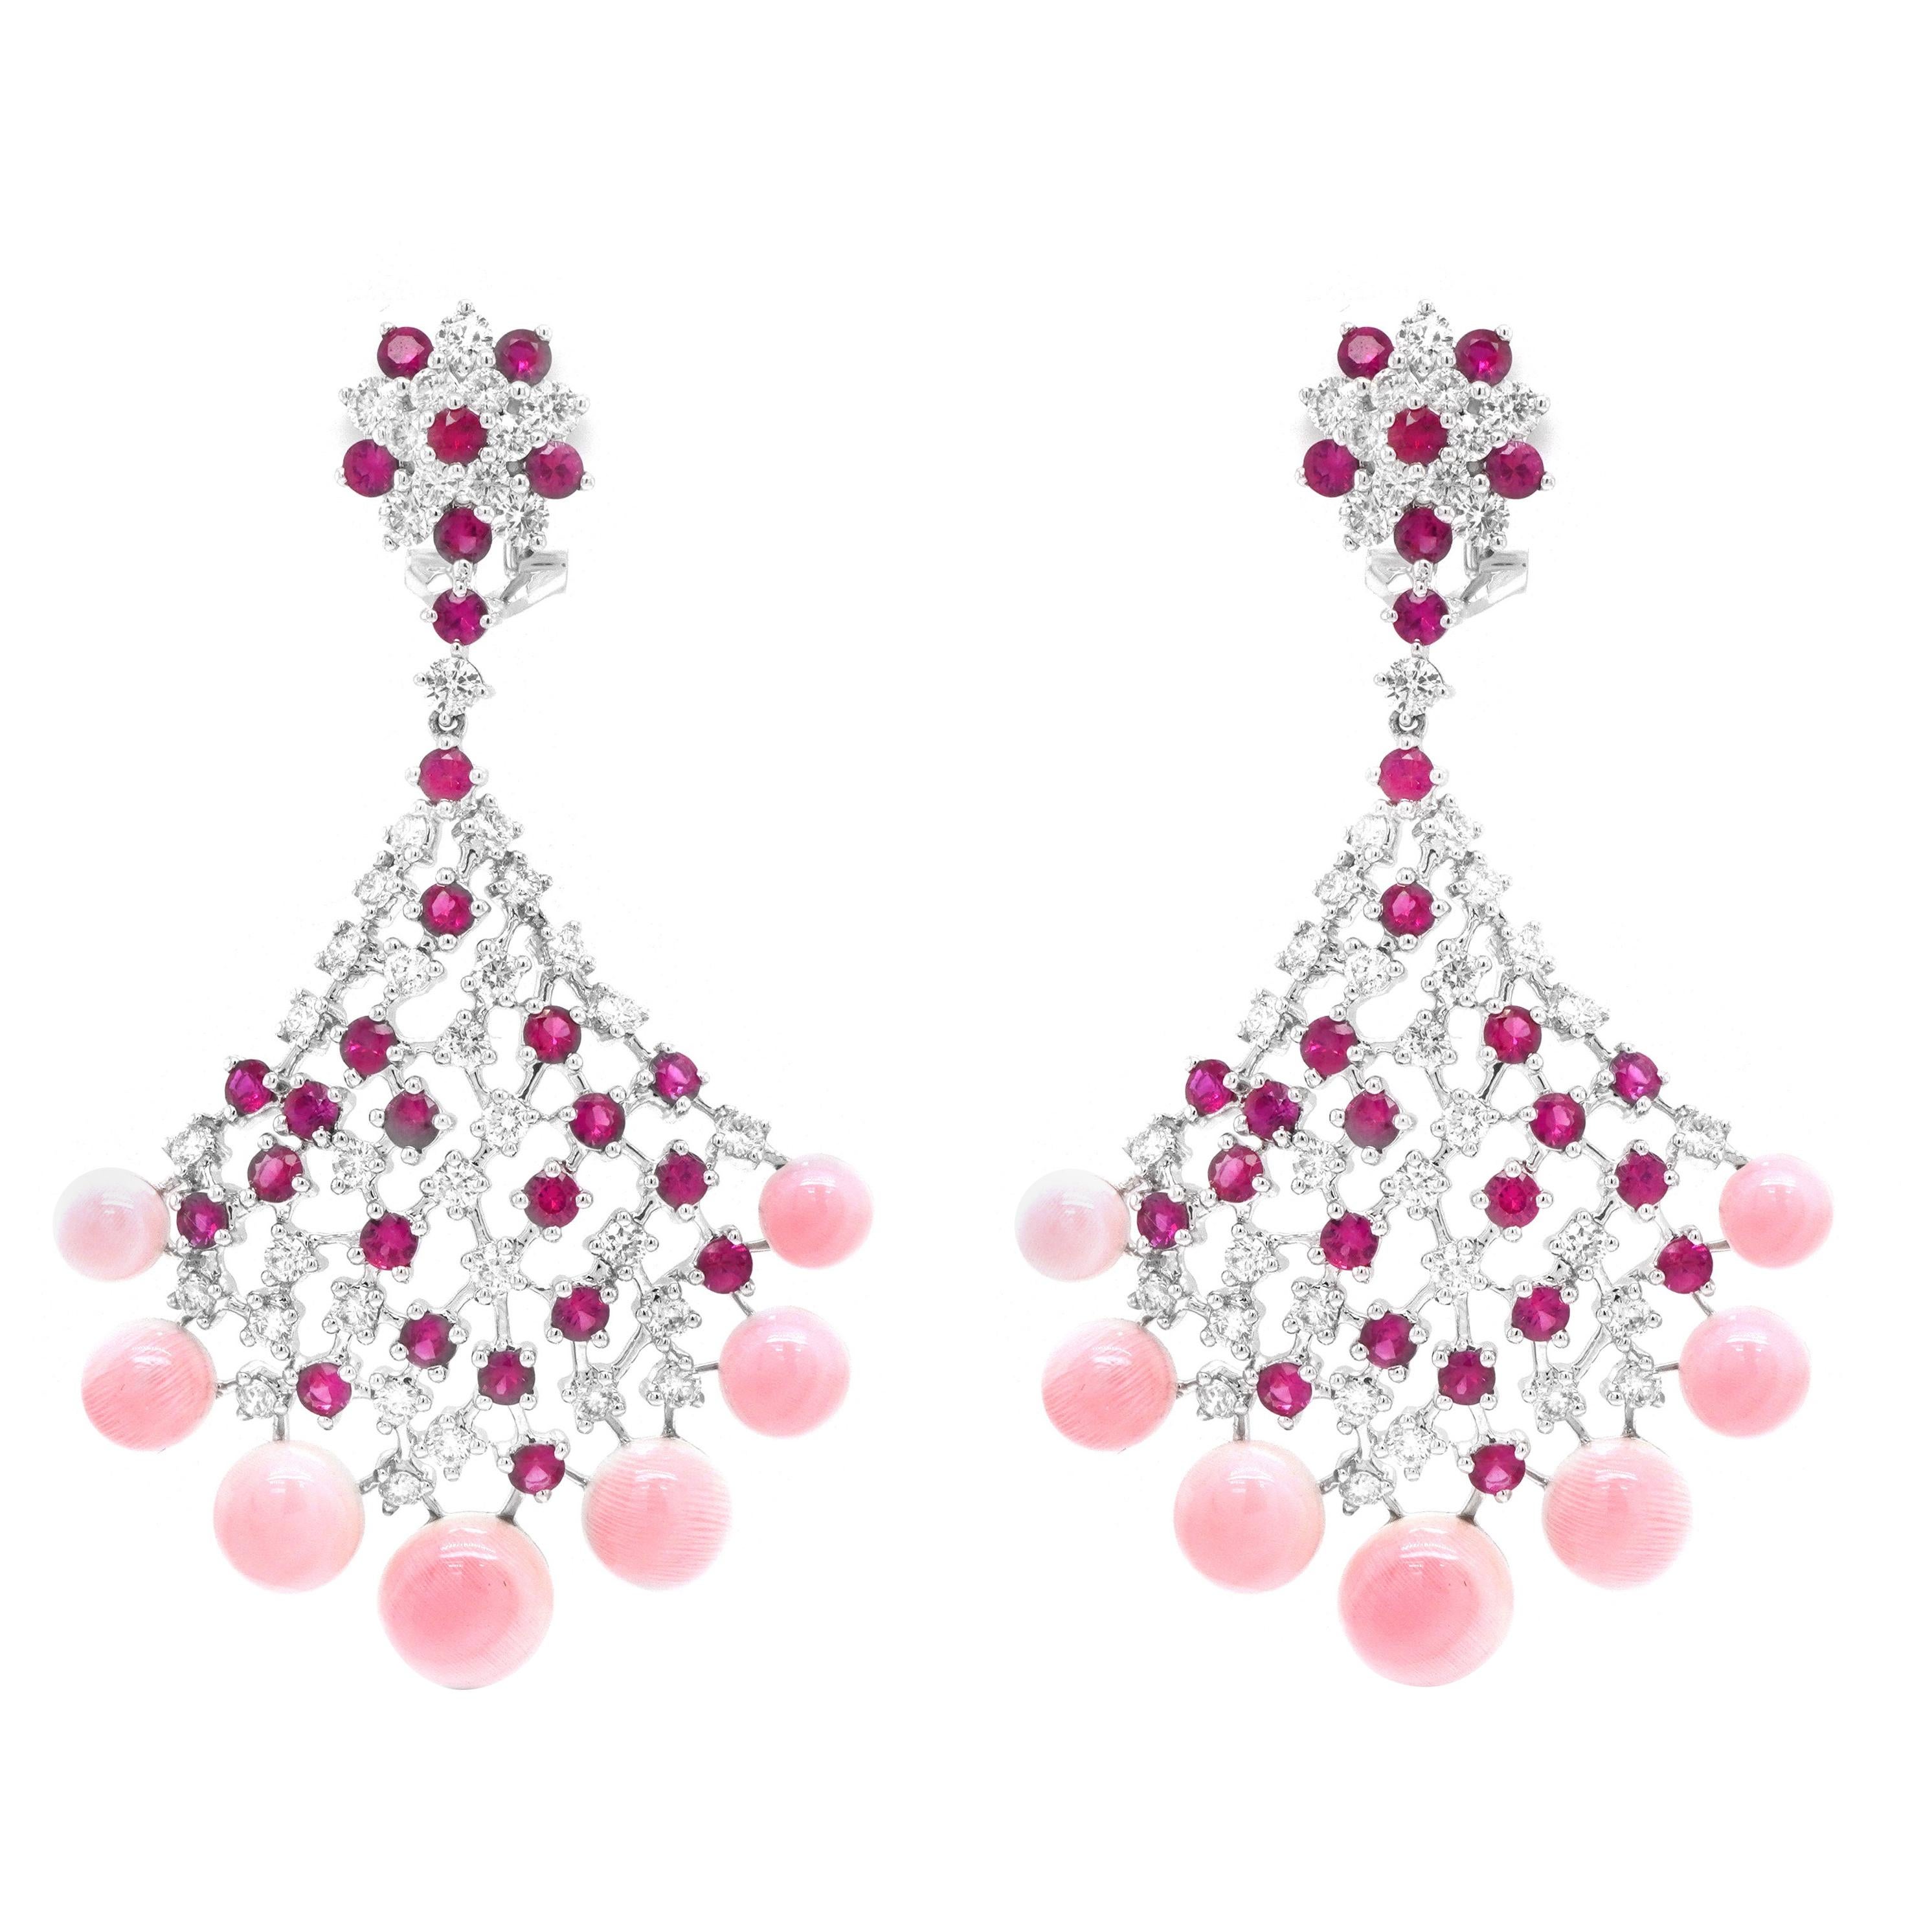 16.80 Carat Caribbean "Conch Shell" and 4.17 Carat Ruby Chandelier Earring